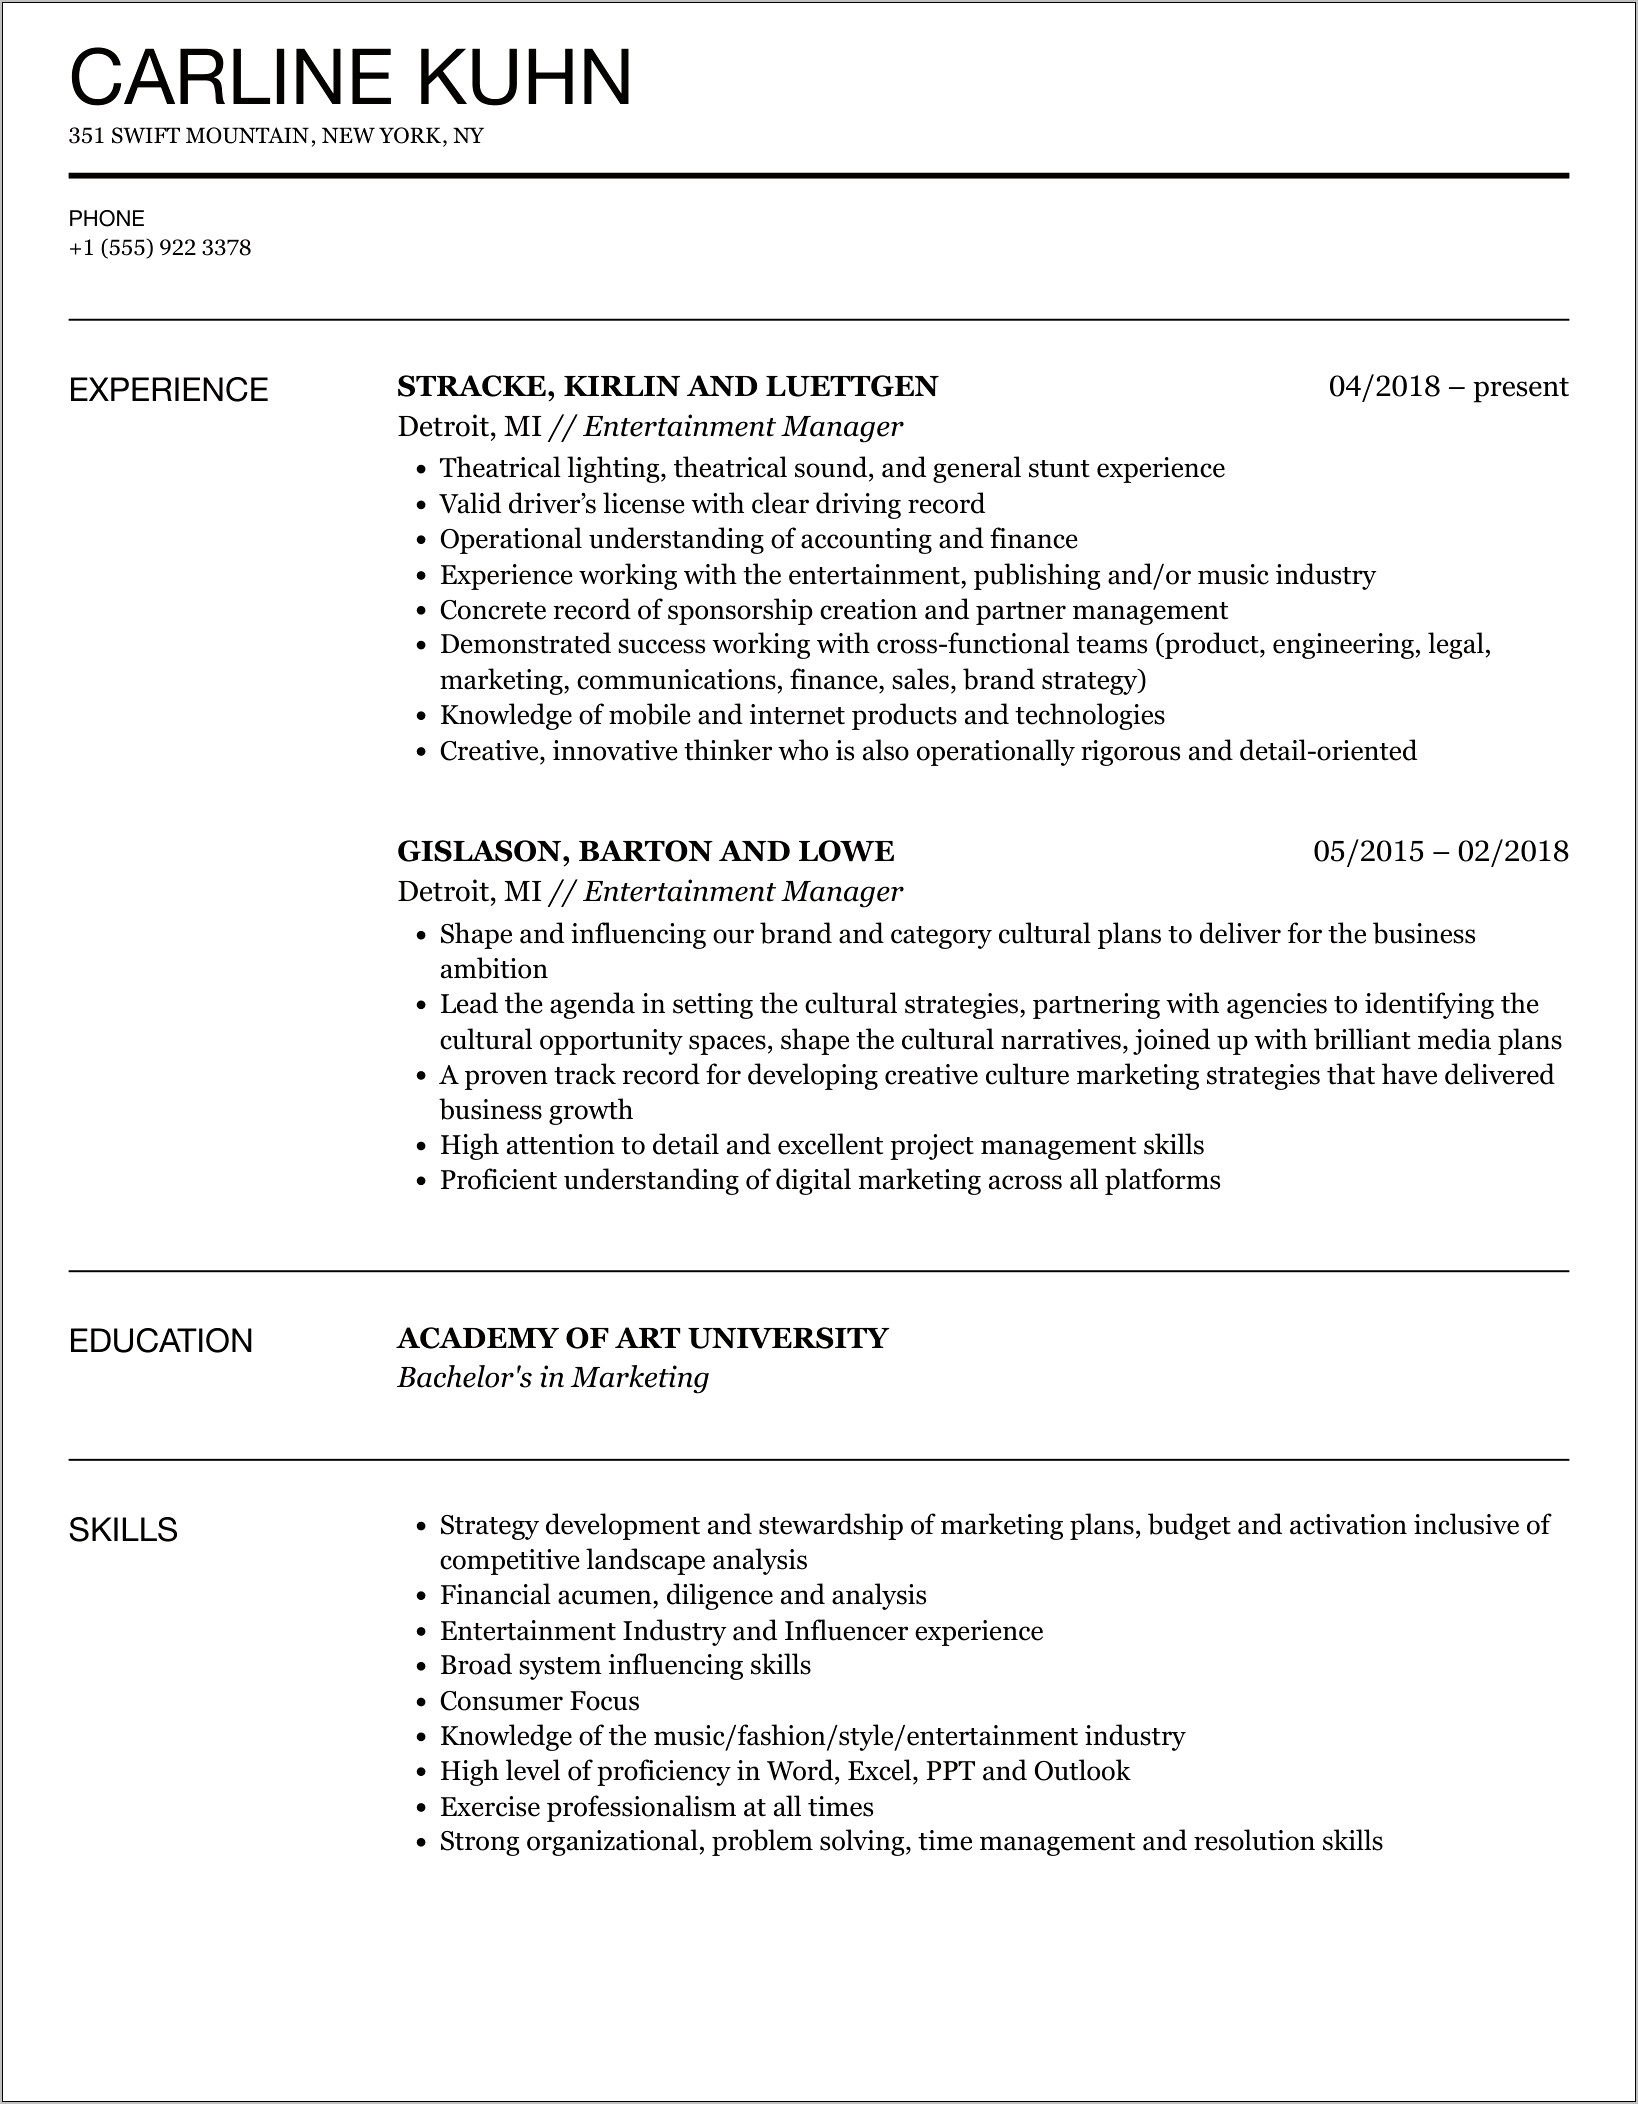 Resume Examples For Entertainment Industry